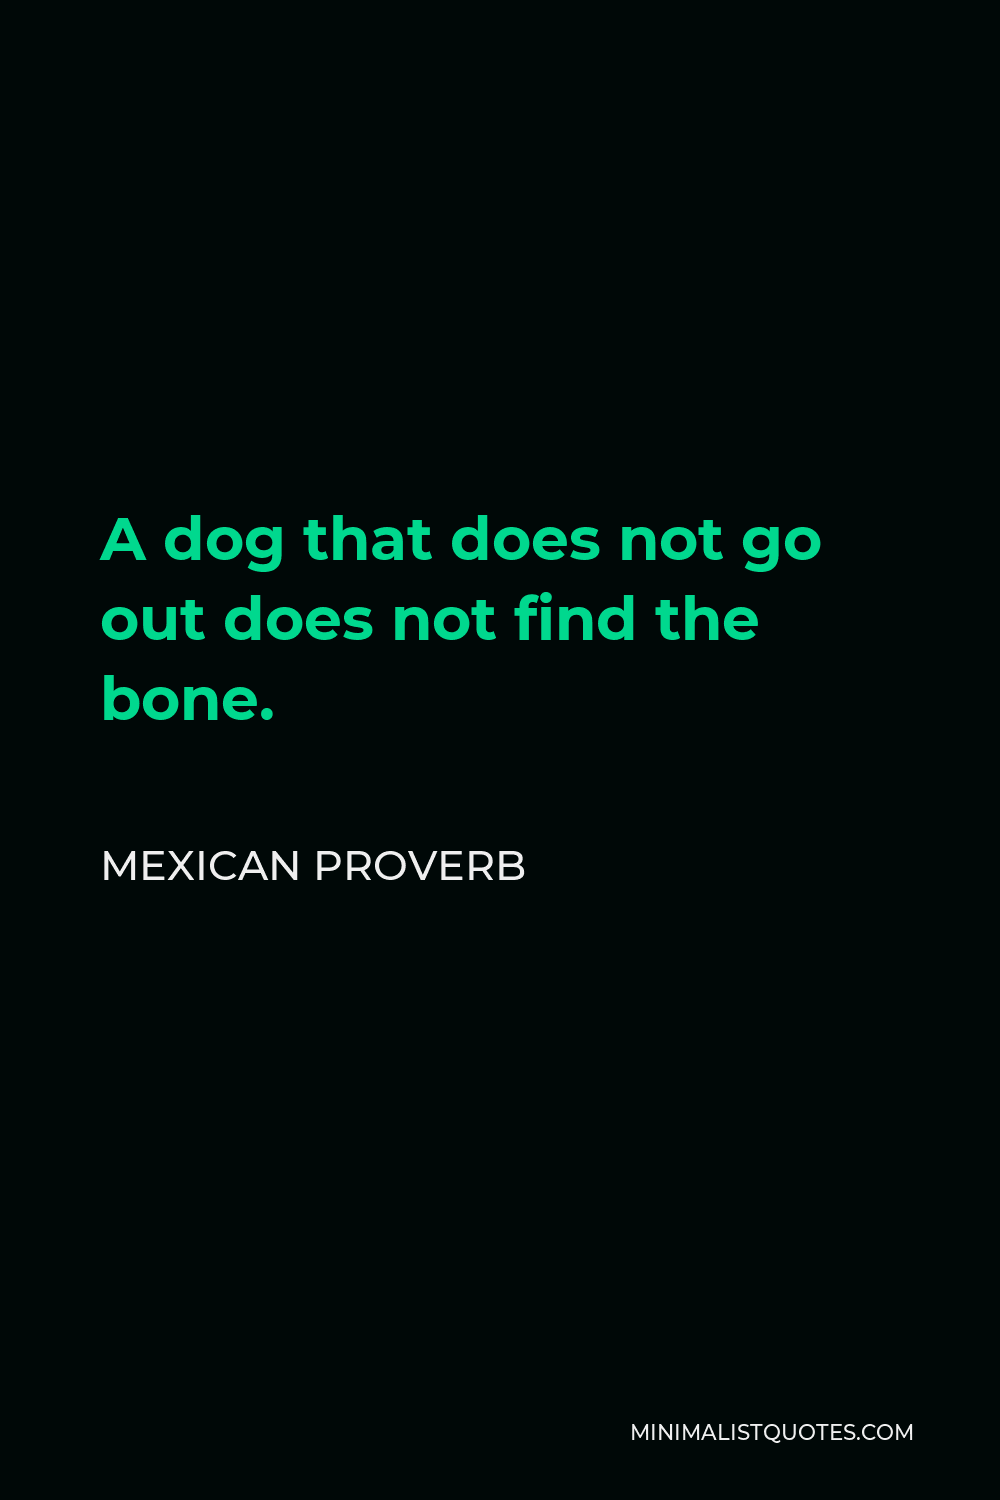 Mexican Proverb Quote - A dog that does not go out does not find the bone.